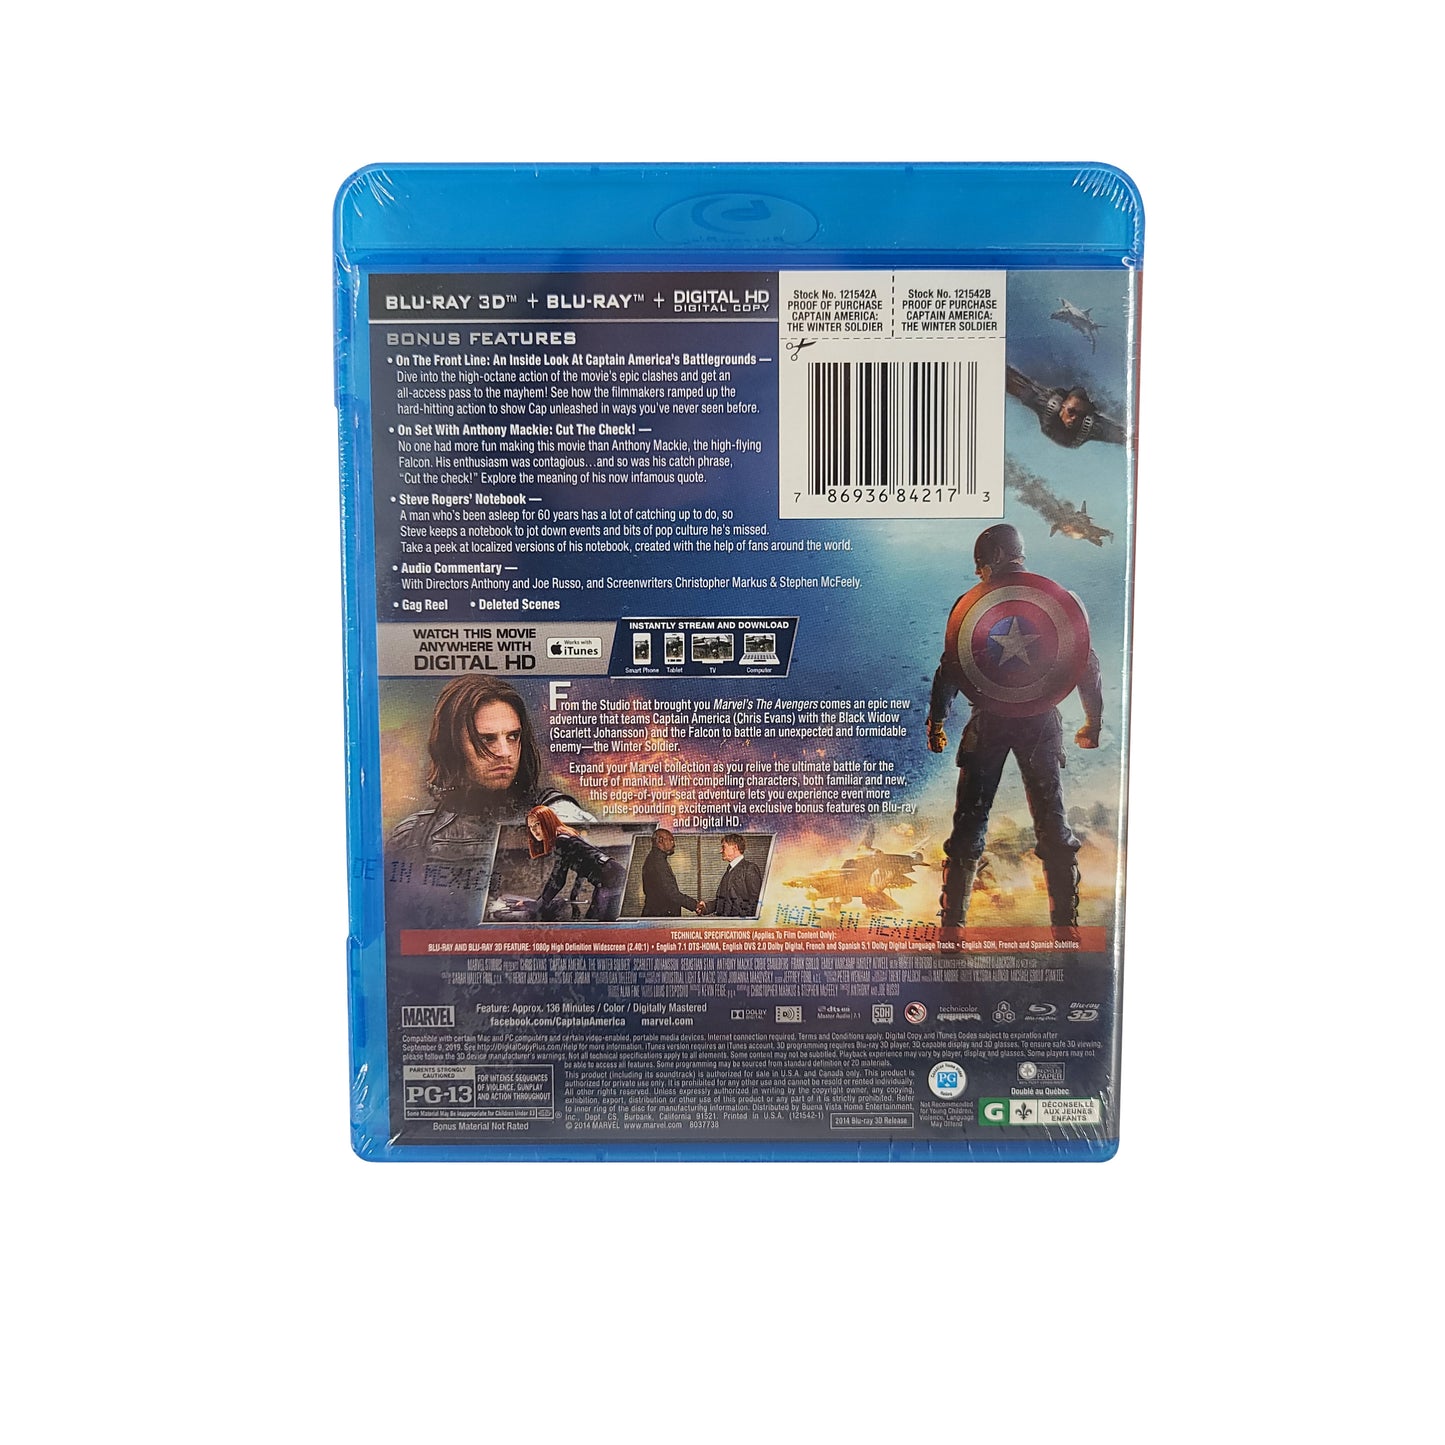 'Captain America: The Winter Soldier' Blu-ray